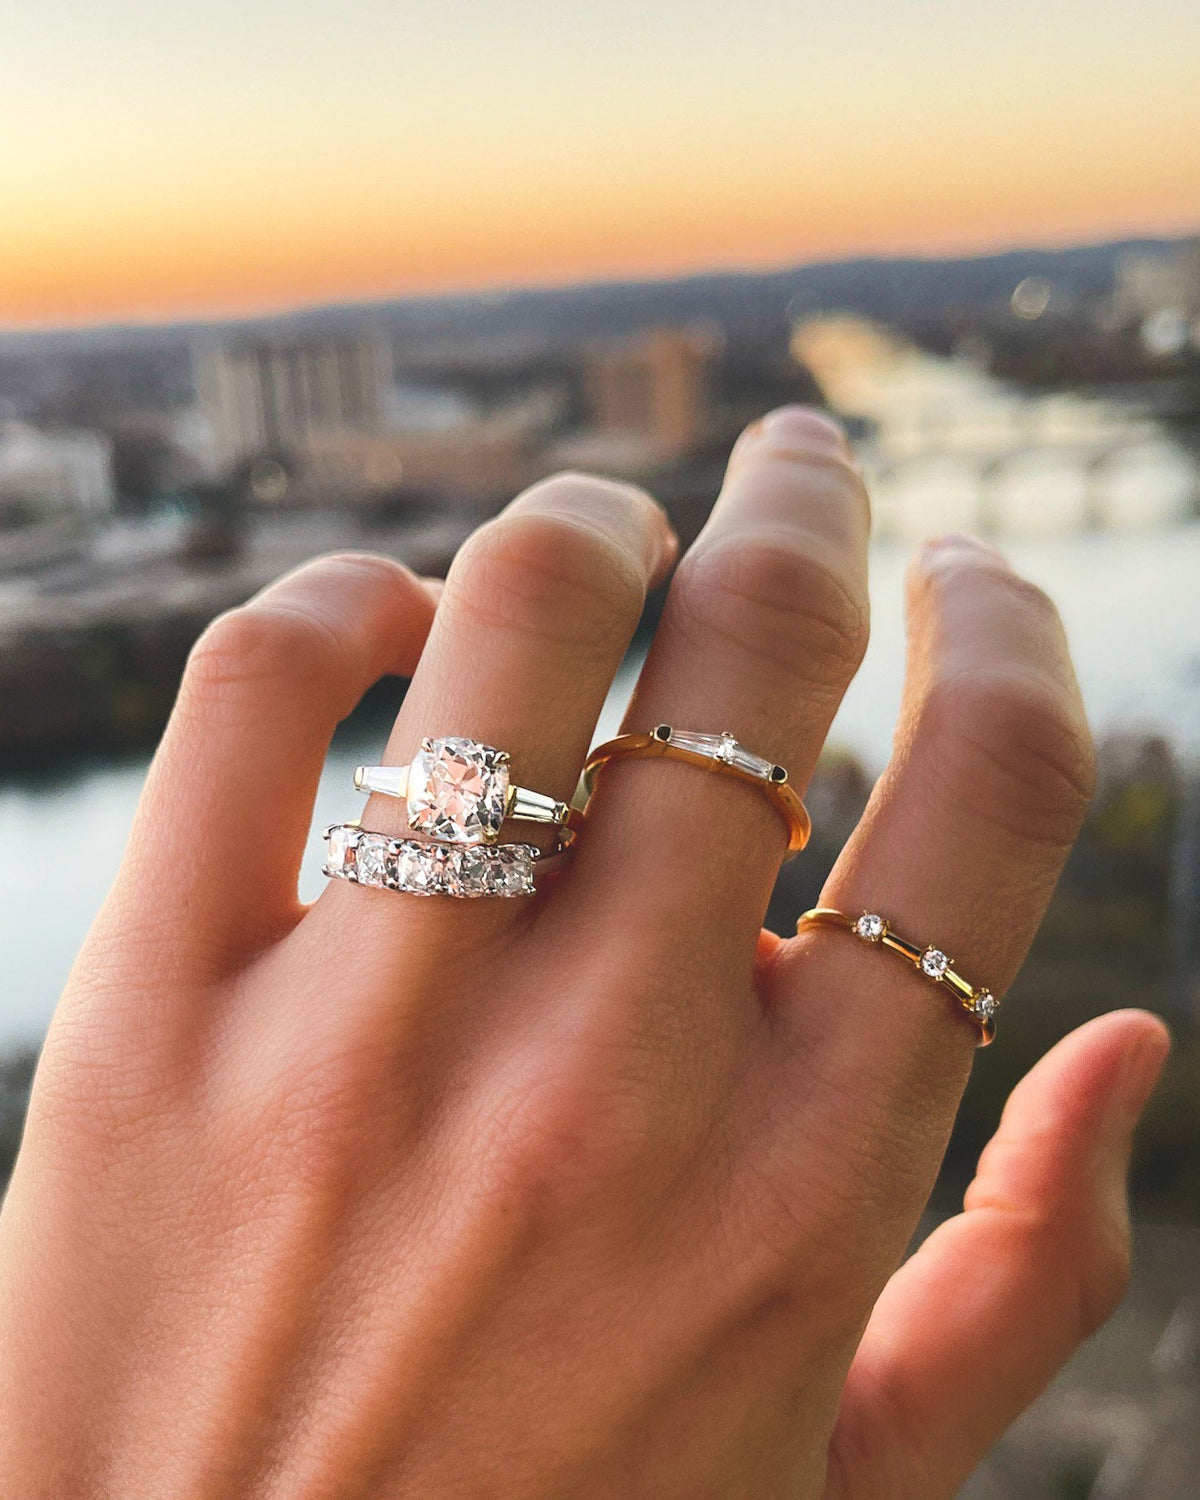 5 alternative stones for an engagement ring